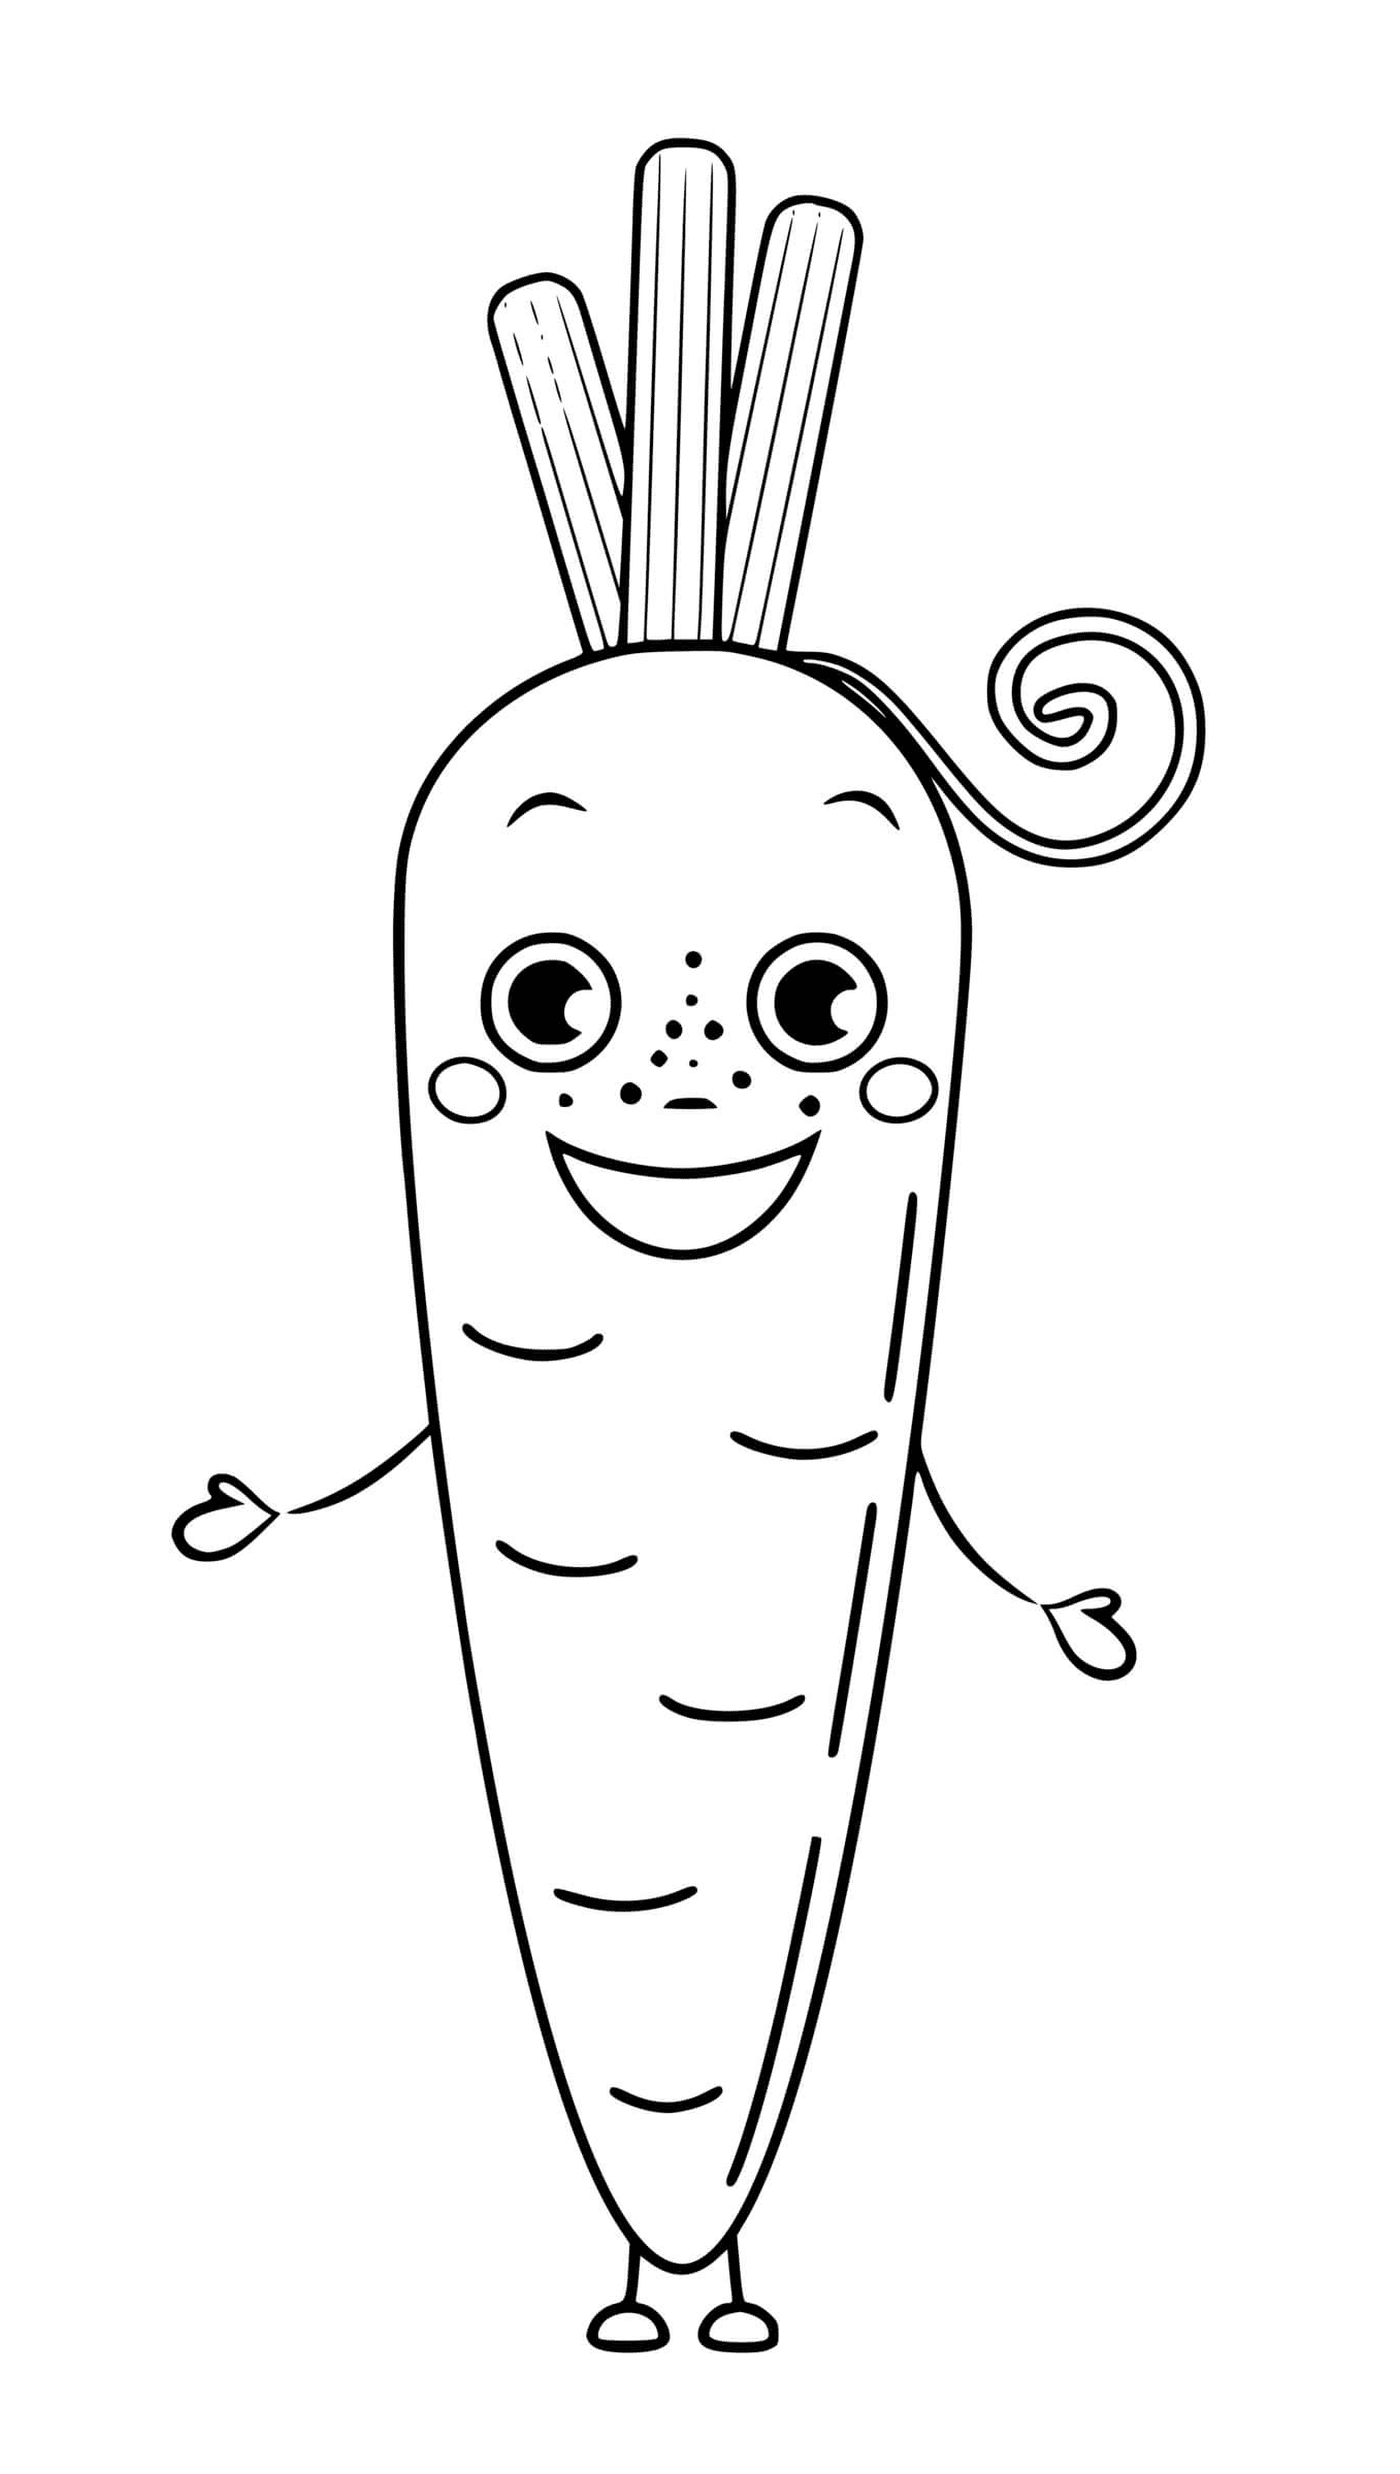  Vegetable carrot with eyes and smile, a carrot with a curly tail 